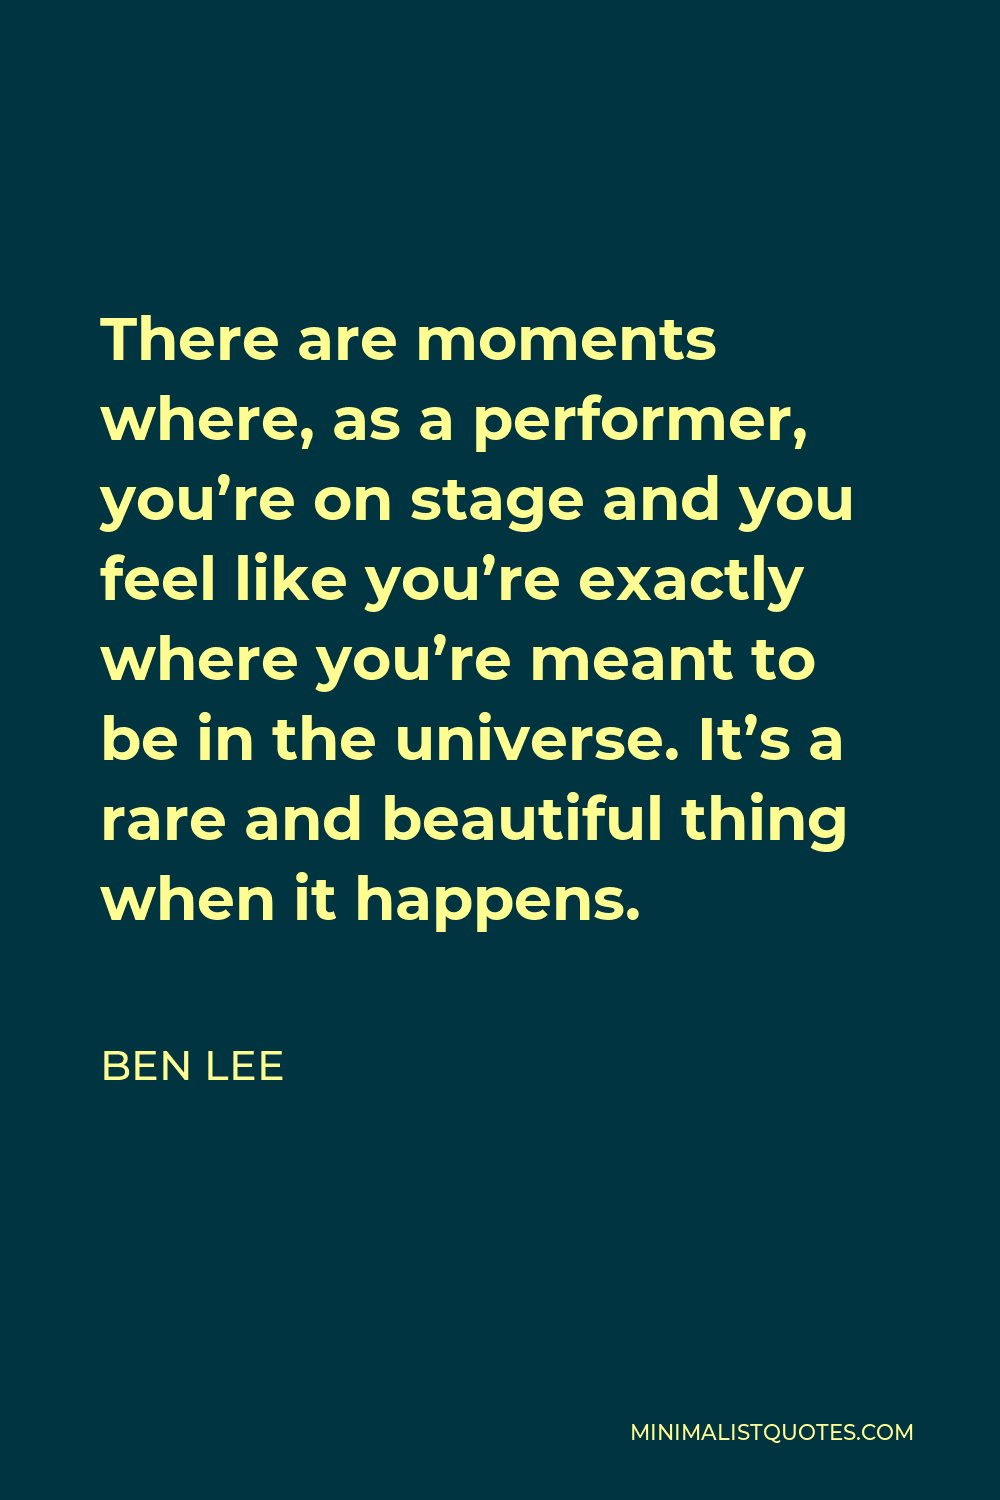 Ben Lee Quote - There are moments where, as a performer, you’re on stage and you feel like you’re exactly where you’re meant to be in the universe. It’s a rare and beautiful thing when it happens.